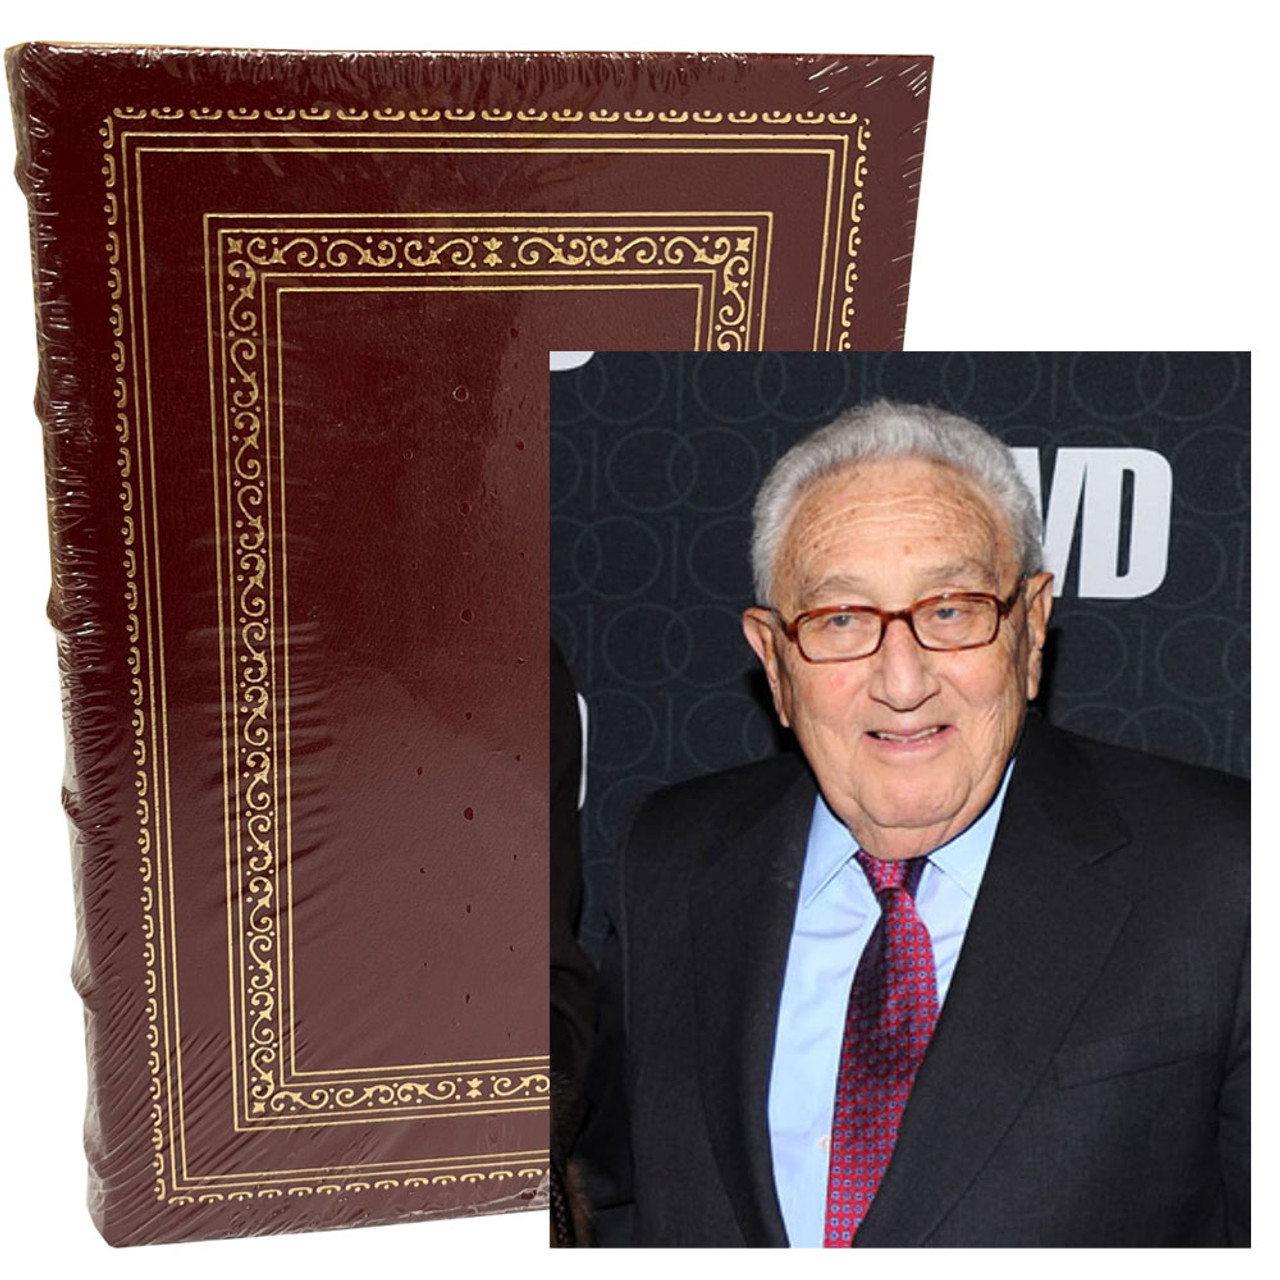 Henry Kissinger "Does America Need a Foreign Policy?" Signed Limited Edition of 1,500 w/COA, Collector's Notes [Sealed]